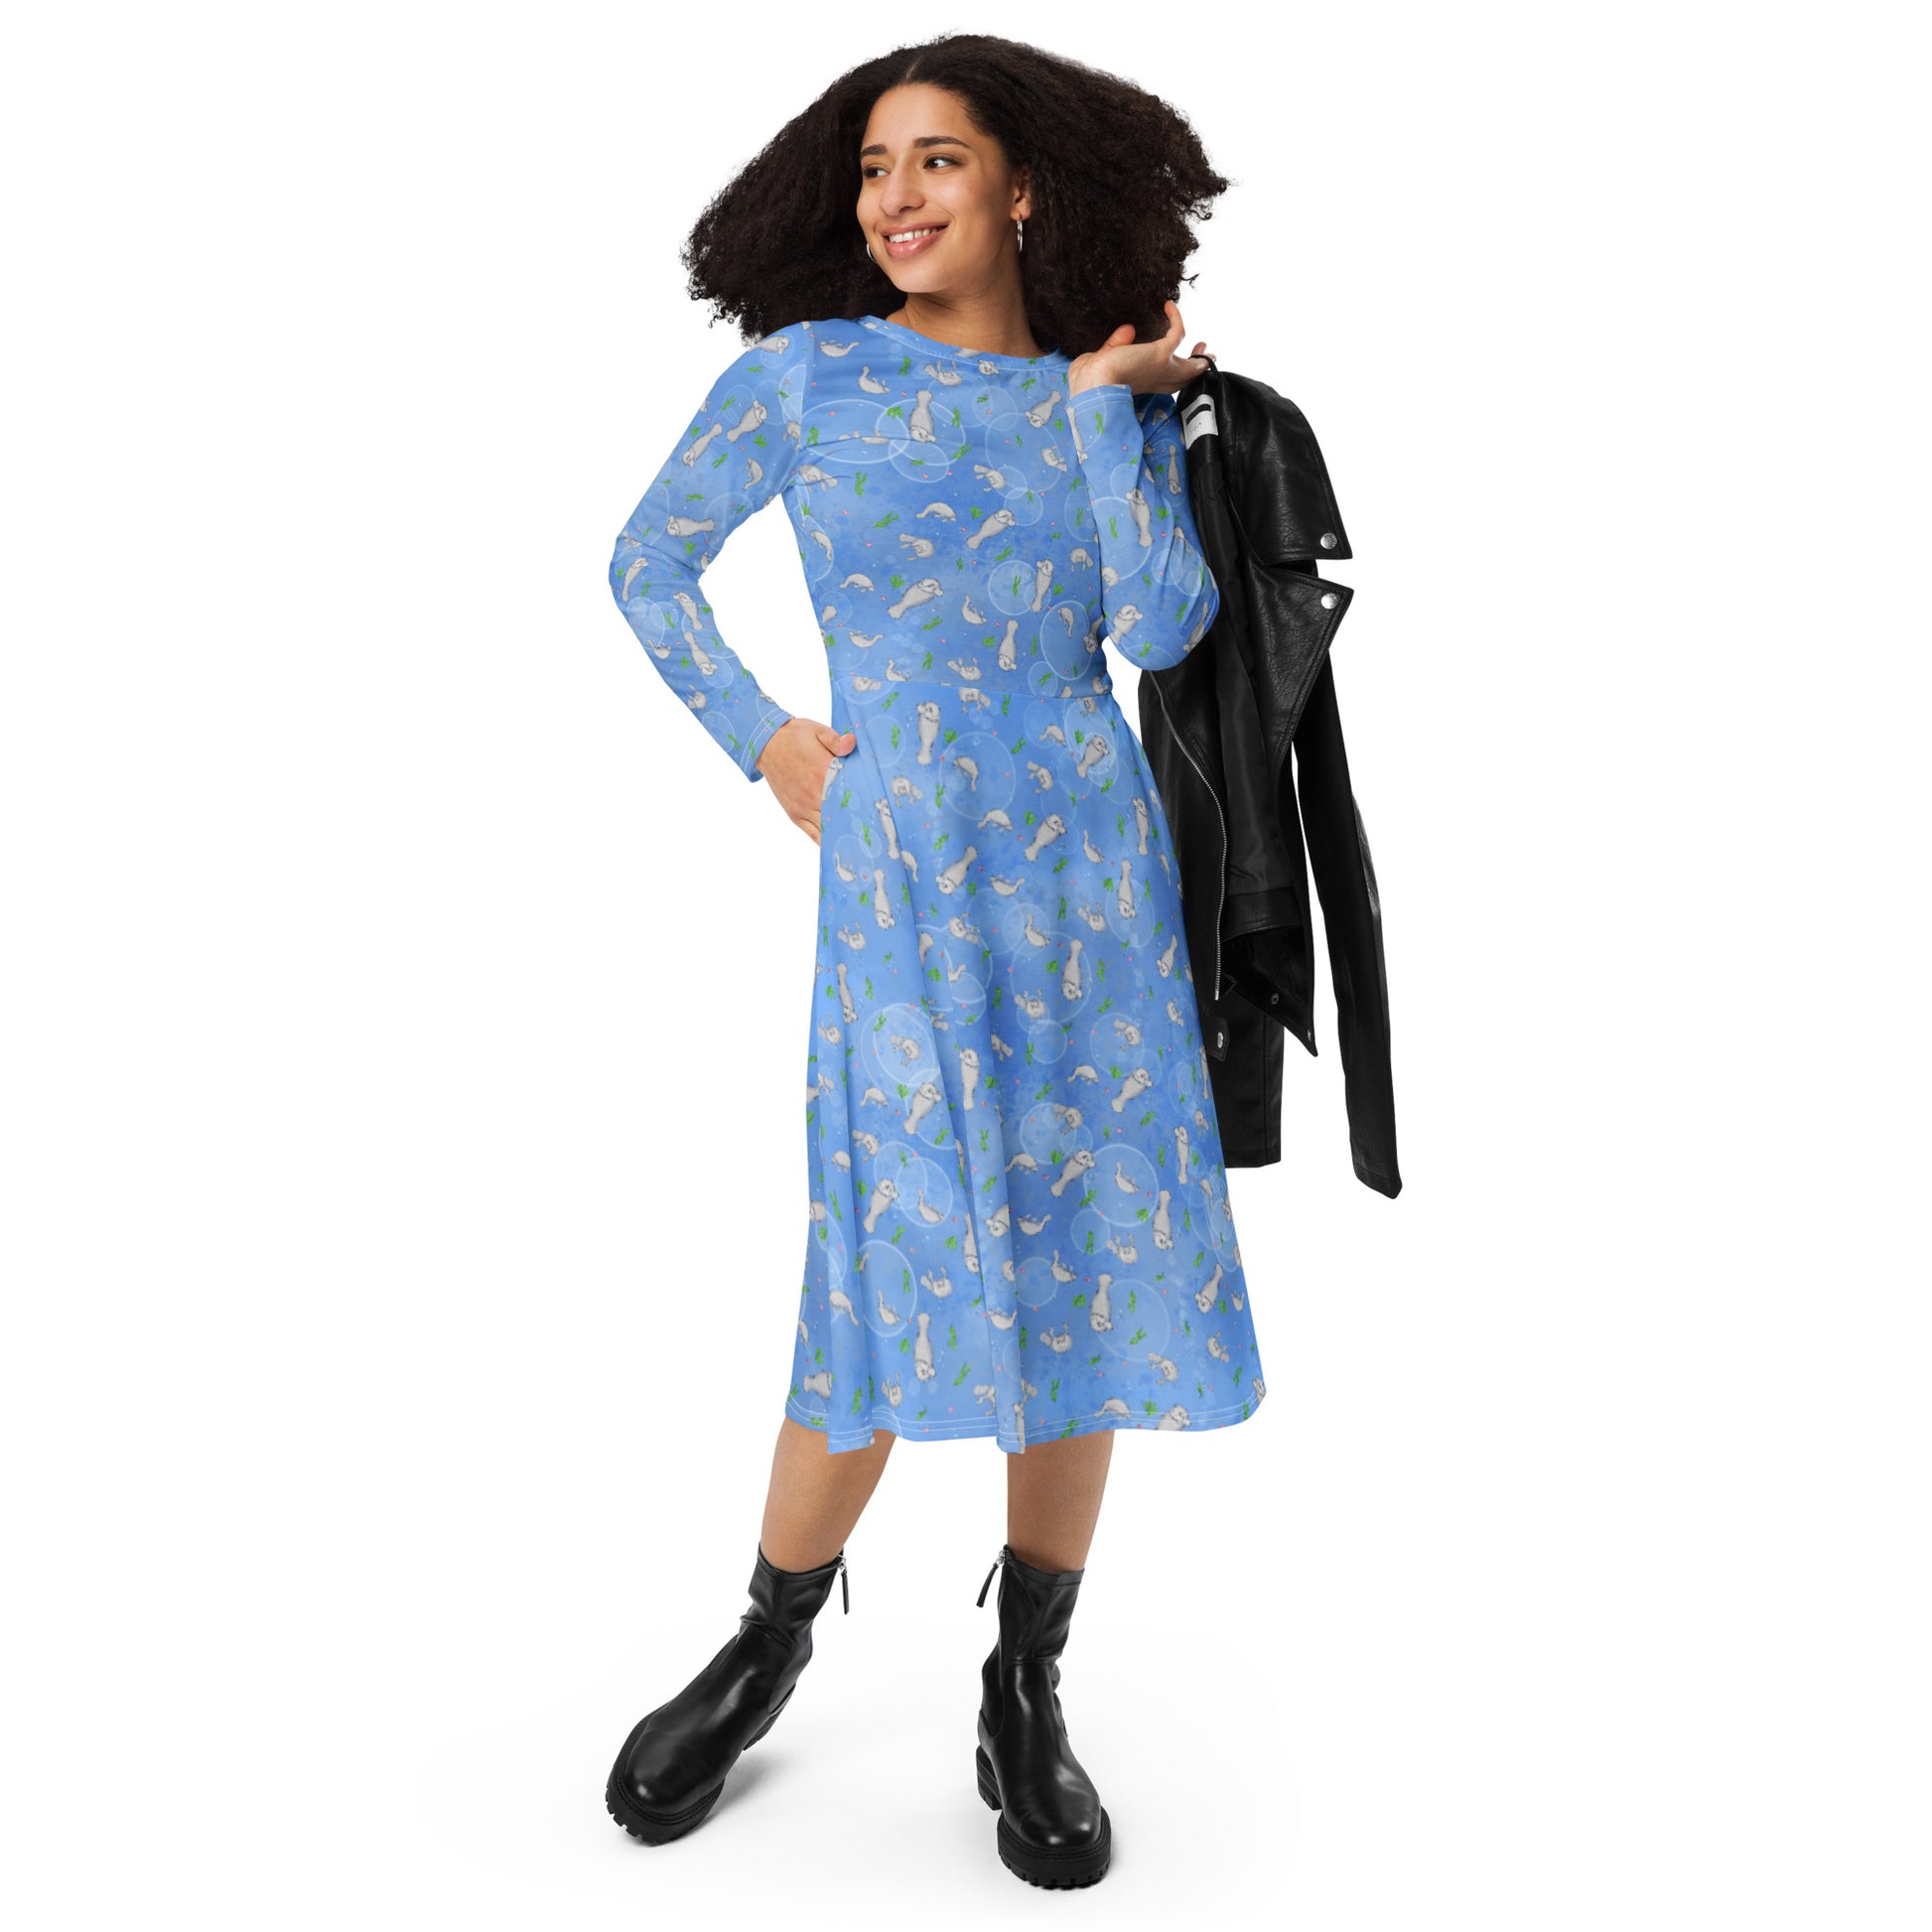 Long sleeve midi dress with fitted waist, flared bottom, and side pockets. Features a patterned design of manatees, seashells, seaweed, and bubbles on an ocean blue background. Shown on female model with black jacket slung over her shoulder.